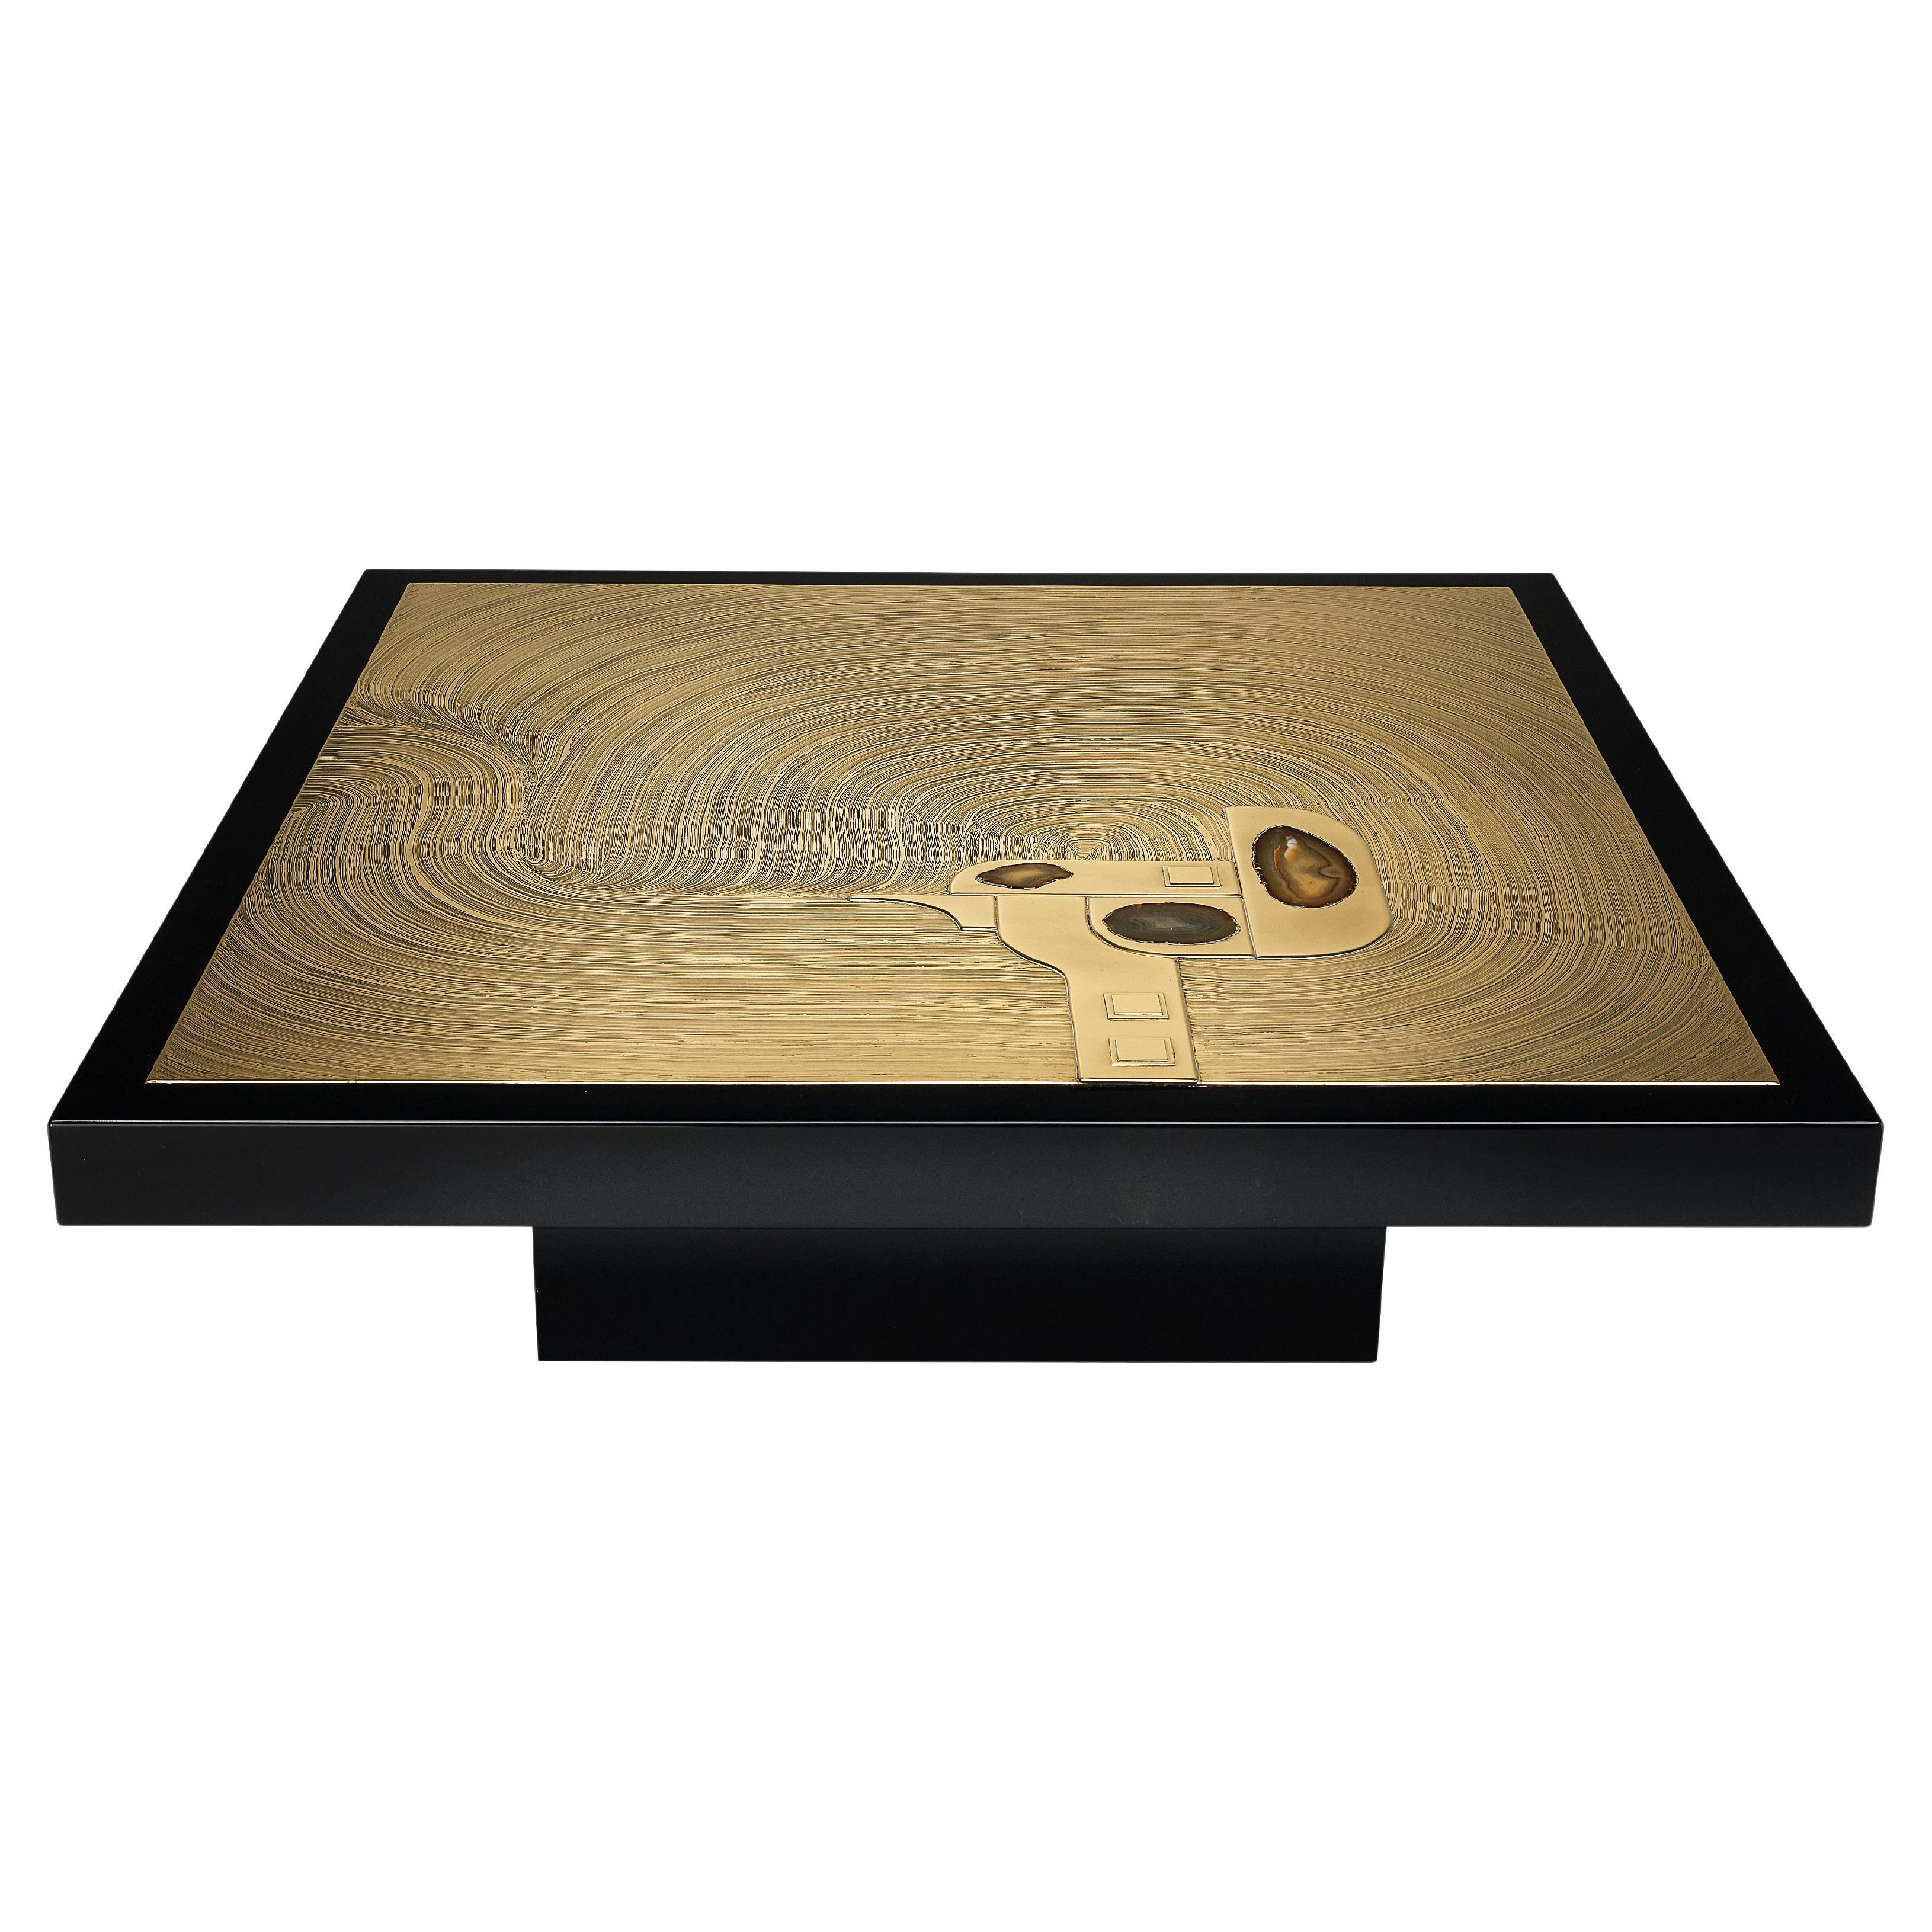 Jean Claude Dresse Etched Brass Inlayed with Agate Coffee Table